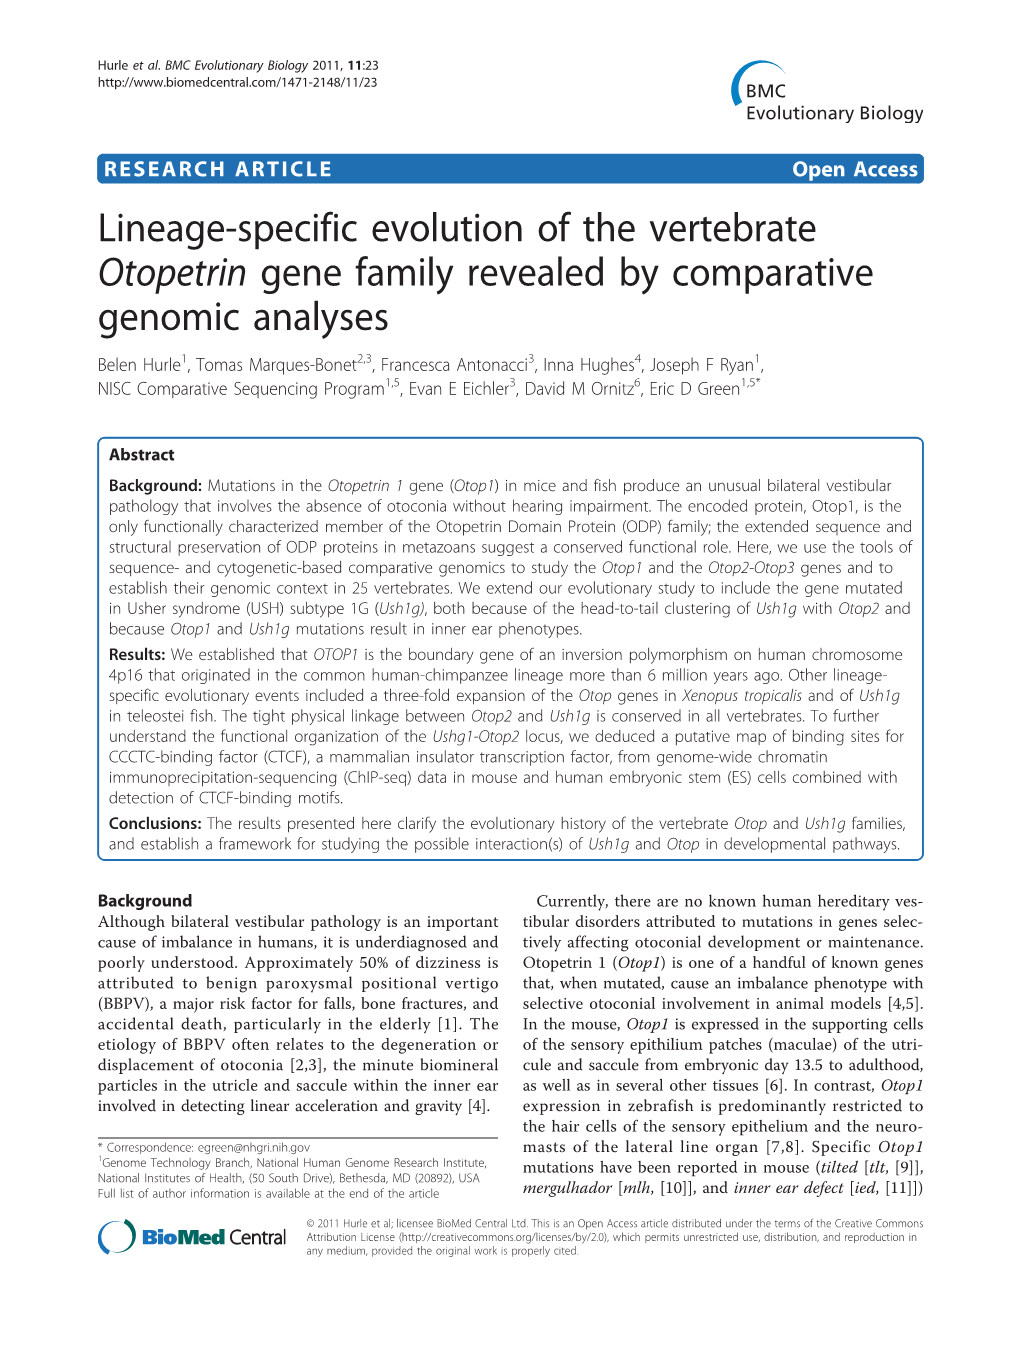 Lineage-Specific Evolution of the Vertebrate Otopetrin Gene Family Revealed by Comparative Genomic Analyses